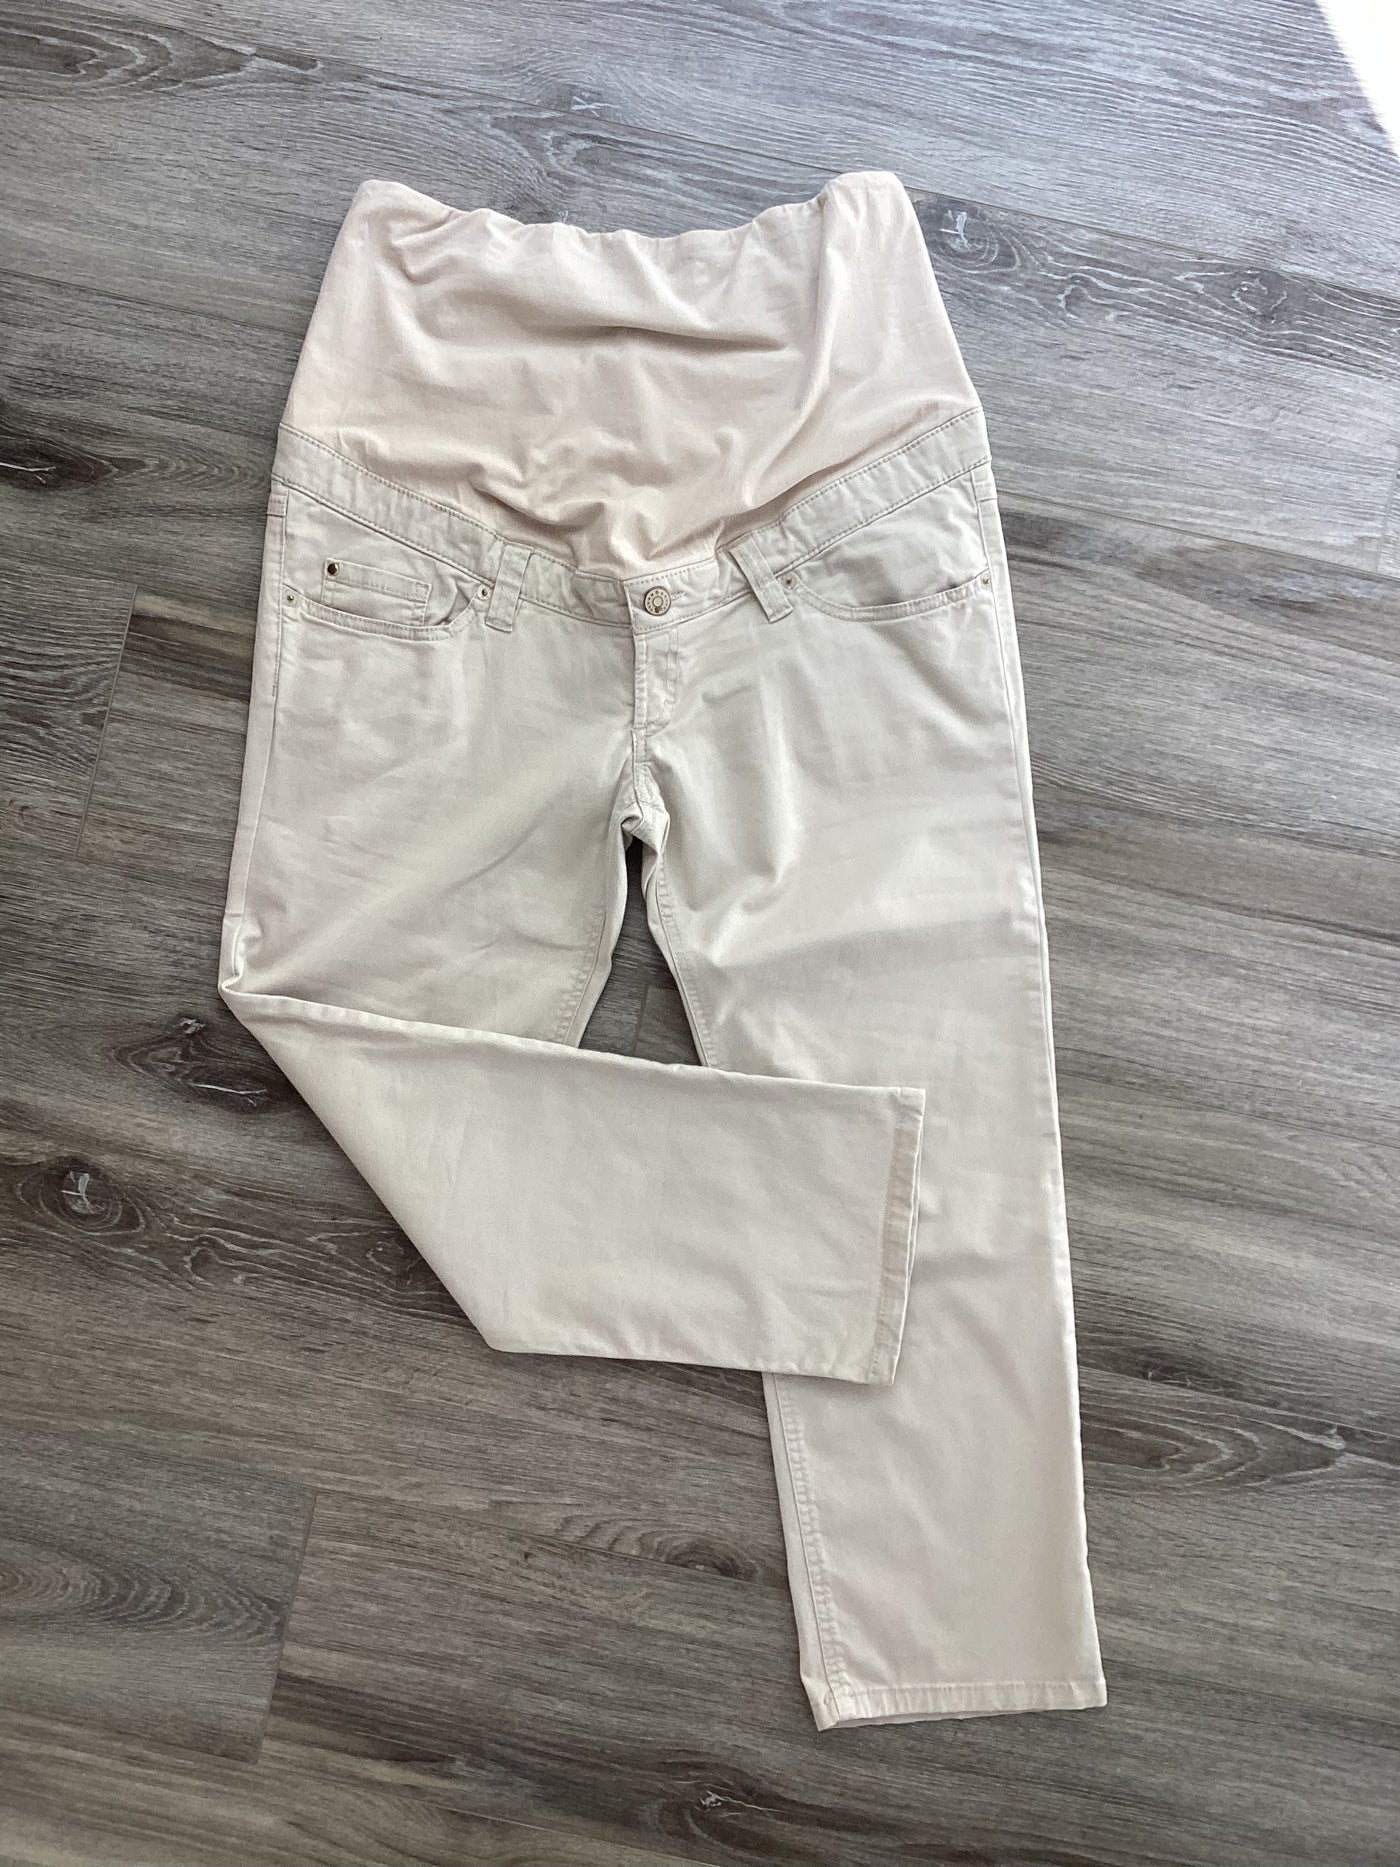 H&M Mama beige overbump ankle grazer chino trousers - Size EUR 44 (would fit UK 12/14)